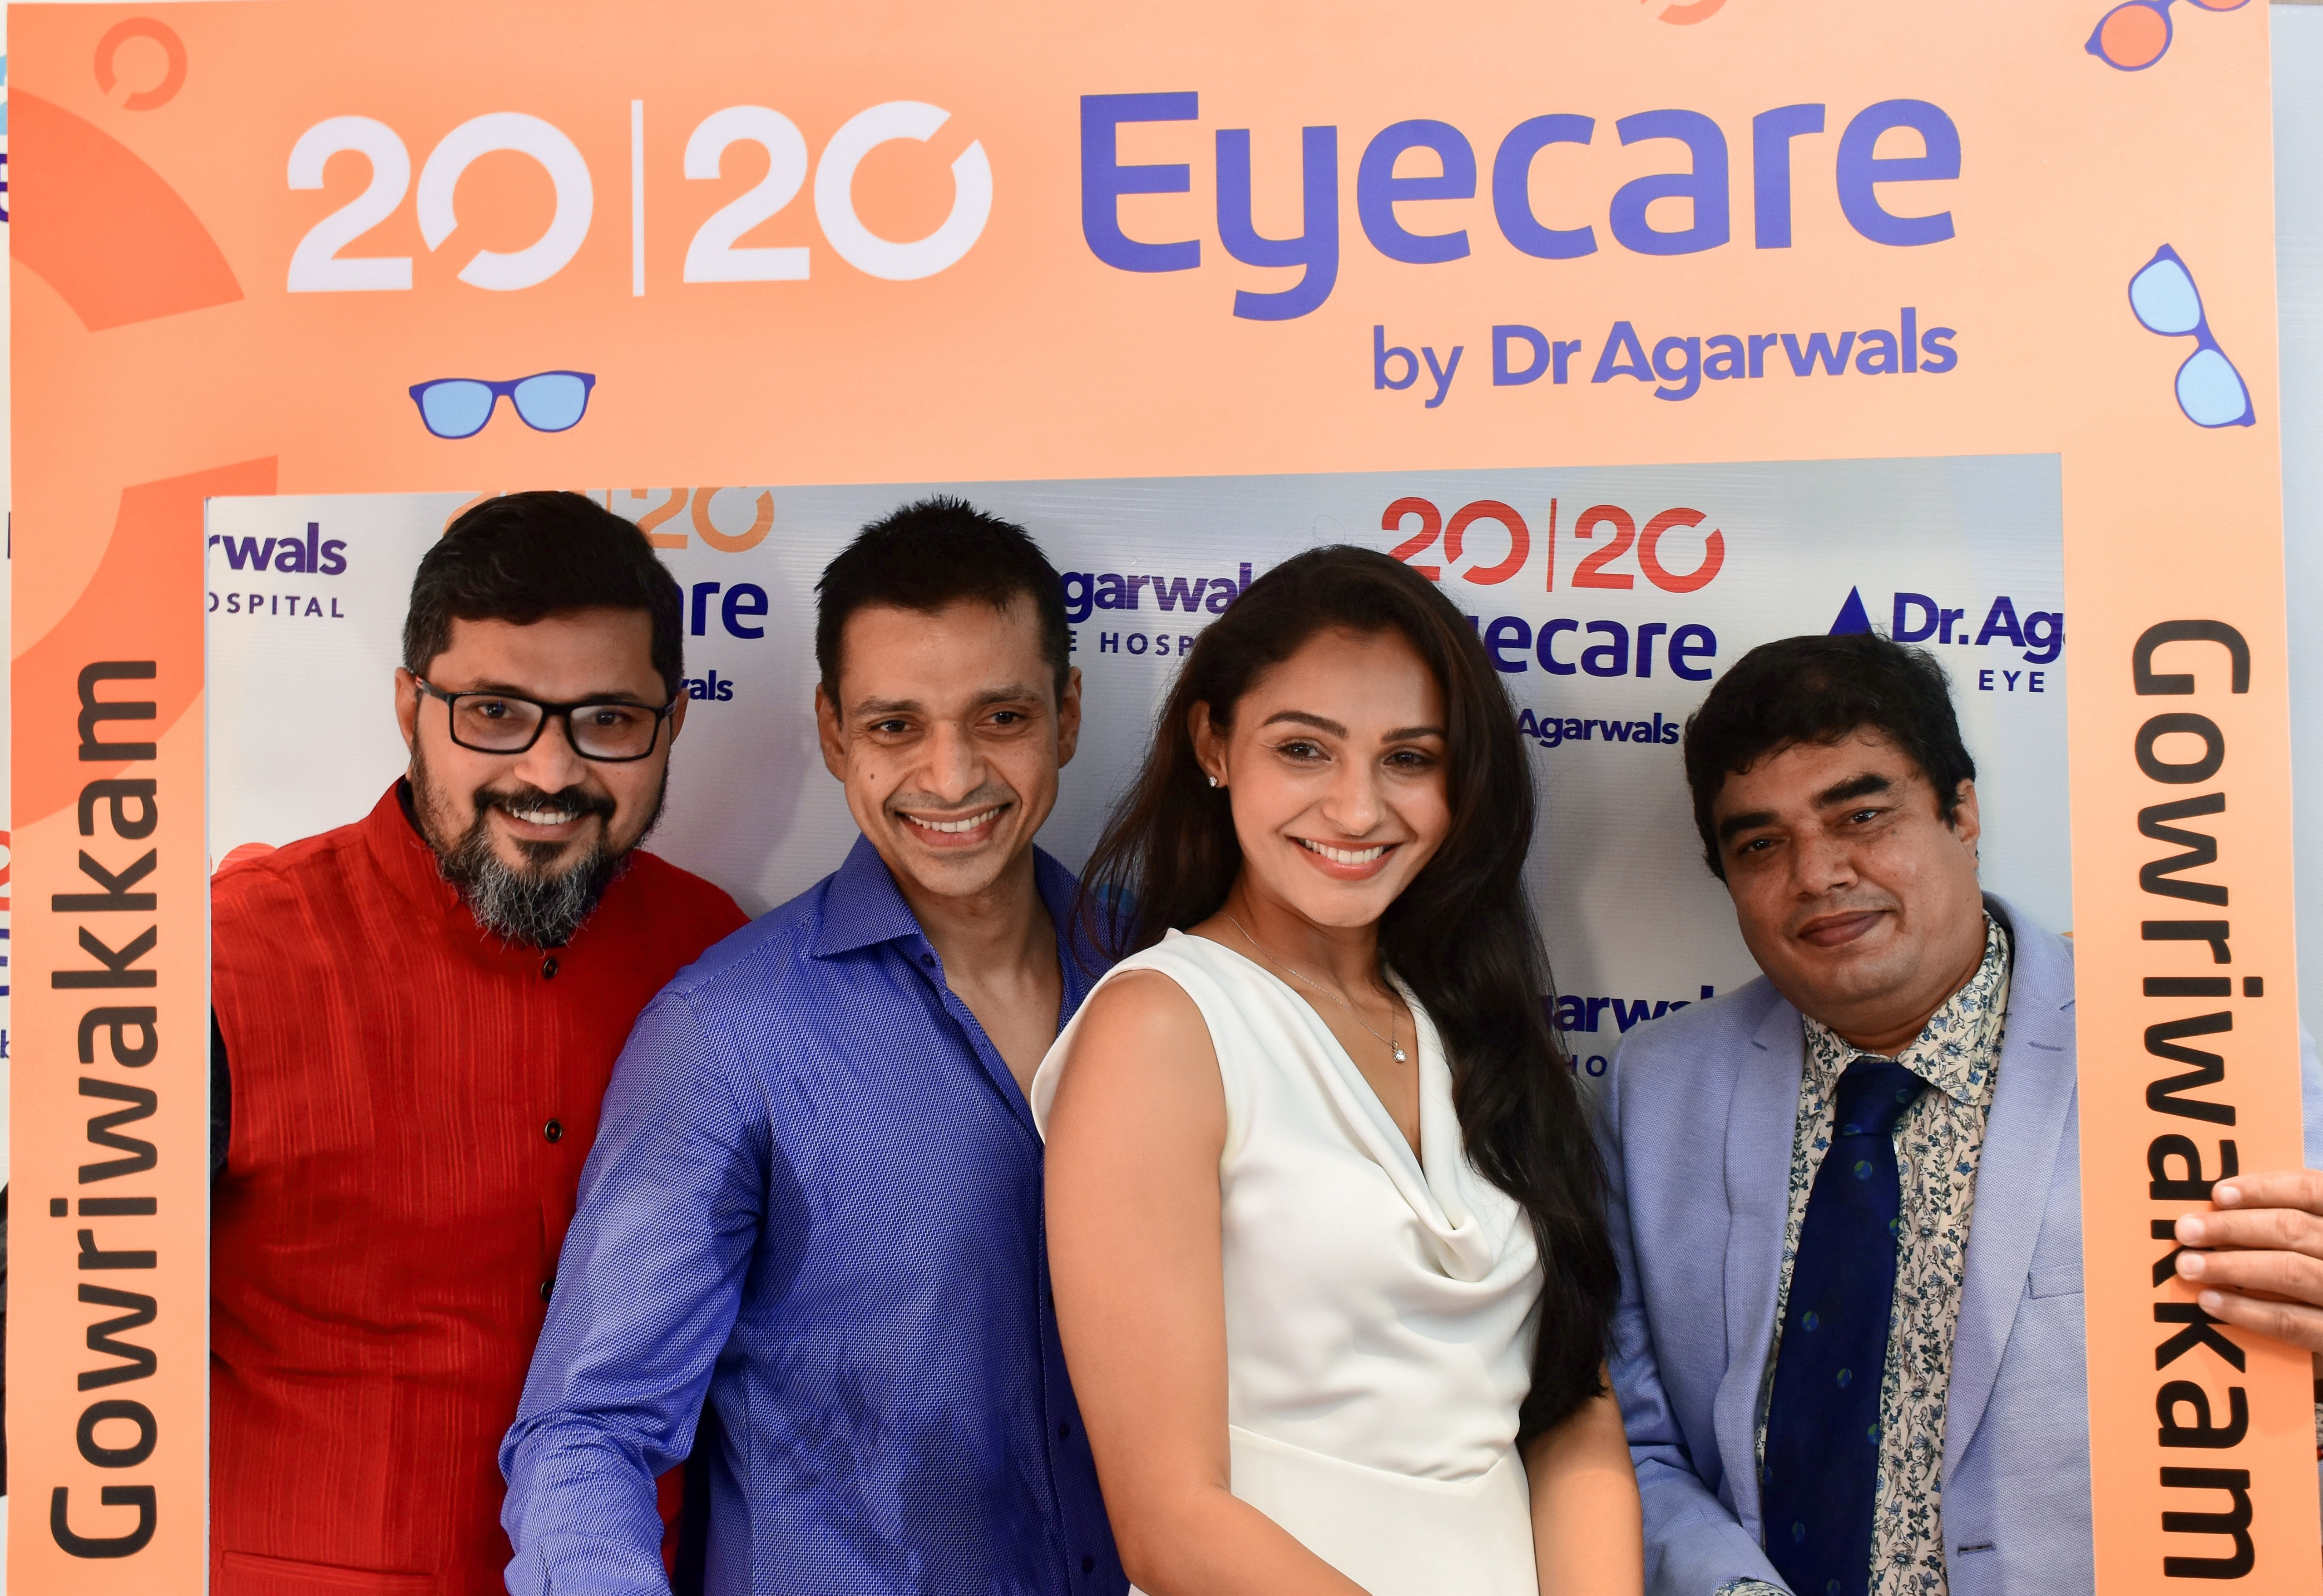 Dr Agarwal’s Eye Hospital inaugurated its first primary eye care centre in Chennai – 20 | 20 Eyecare by Dr Agarwal’s